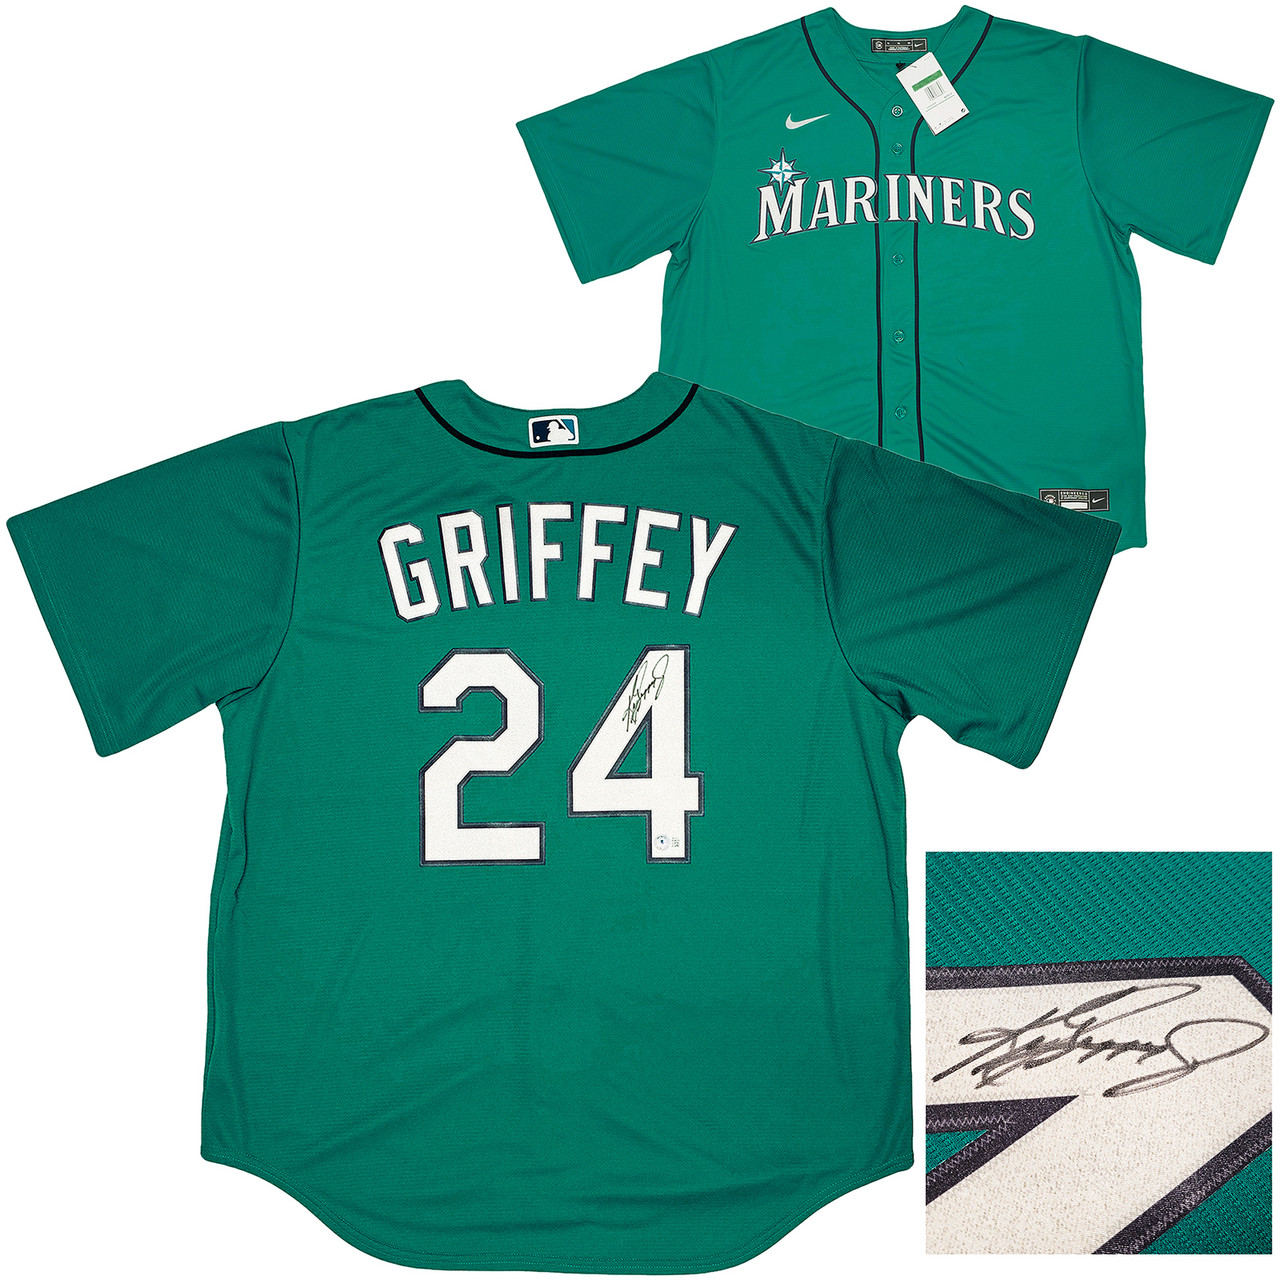 Ken Griffey Jr. Seattle Mariners Autographed White Nike Authentic Jersey